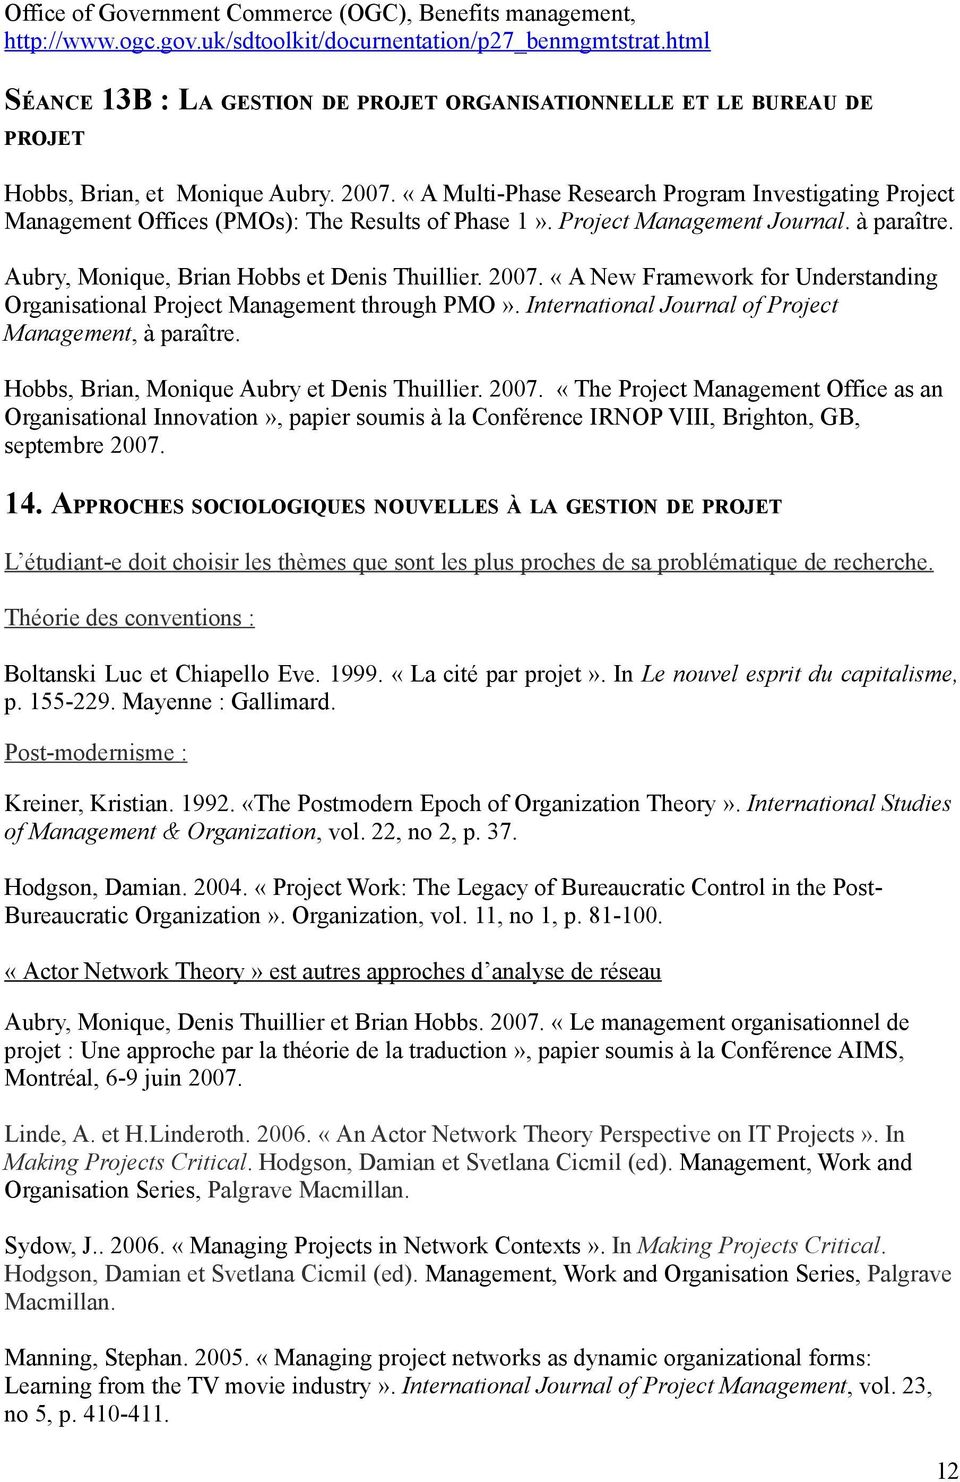 «A Multi-Phase Research Prgram Investigating Prject Management Offices (PMOs): The Results f Phase 1». Prject Management Jurnal. à paraître. Aubry, Mnique, Brian Hbbs et Denis Thuillier. 2007.